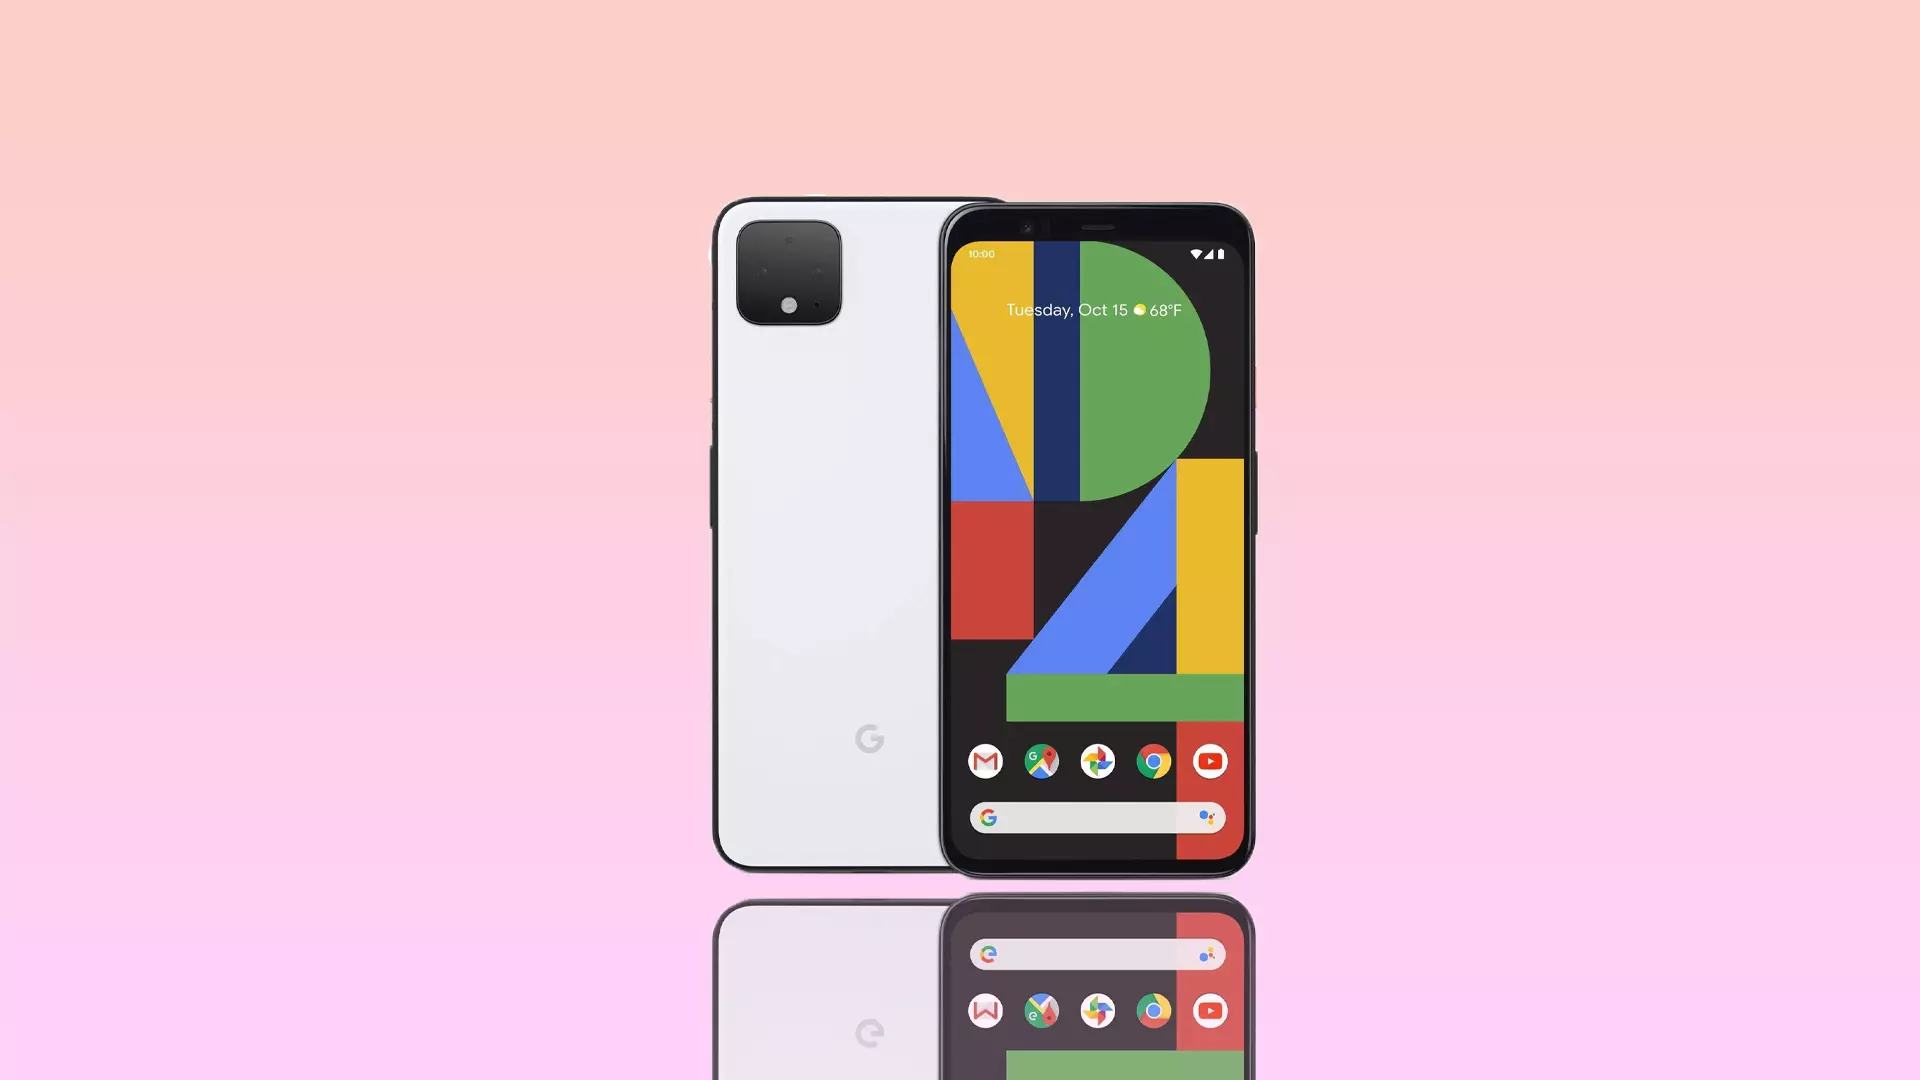 Google rolled out its latest guaranteed software update for the Pixel 4 and 4 XL